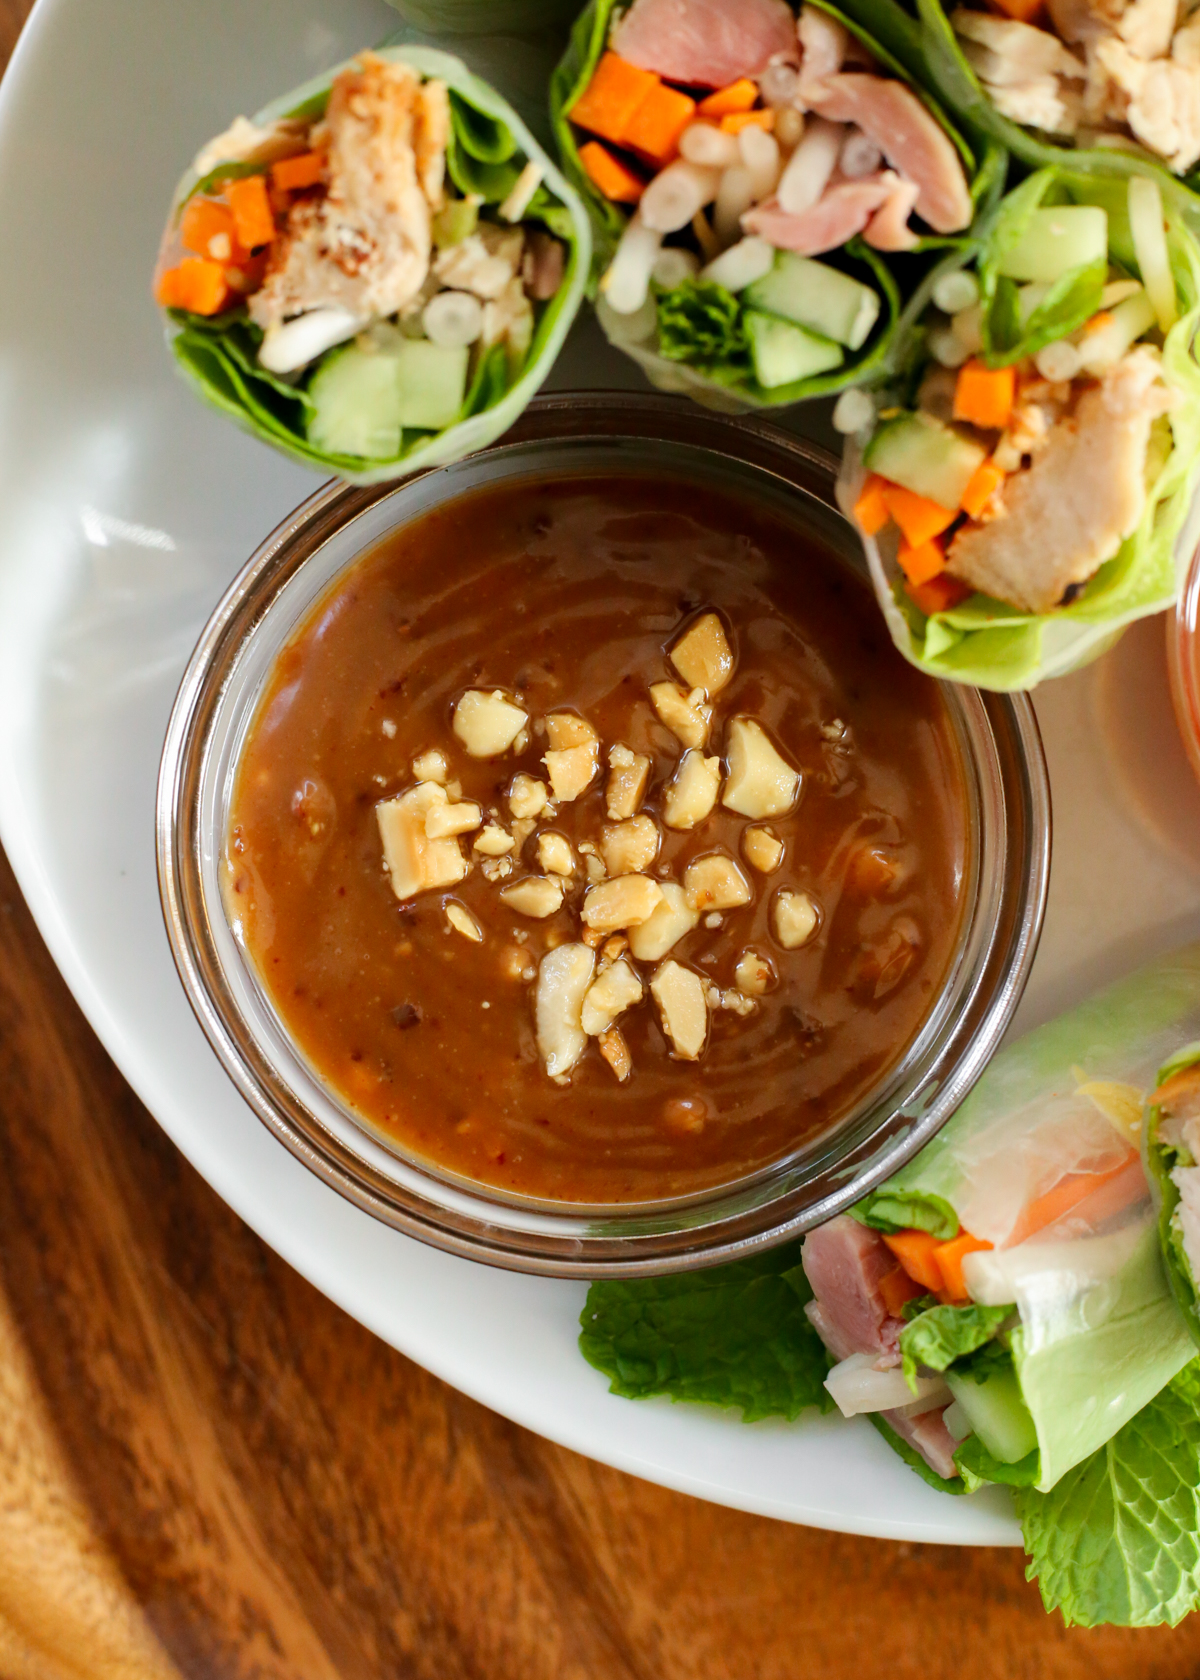 Overhead view of a peanut sauce topped with chopped peanuts, displayed on a serving platter filled with leftover turkey spring rolls that are tightly packed with turkey, carrots, cucumber, bean sprouts, mint leaves, and lettuce inside spring roll wrappers